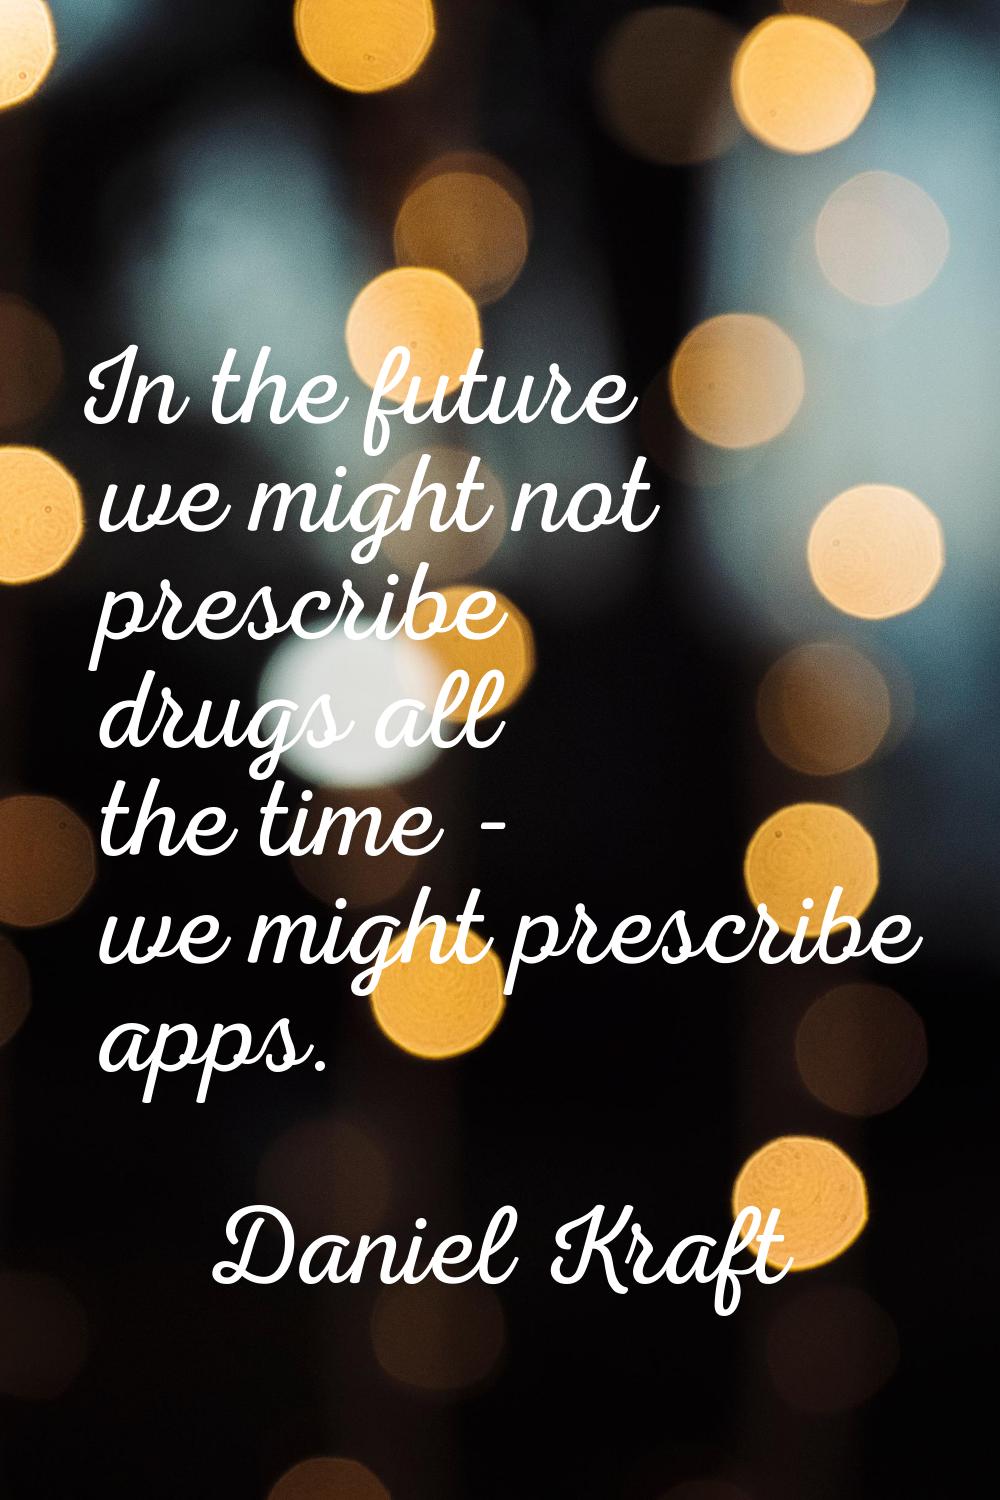 In the future we might not prescribe drugs all the time - we might prescribe apps.